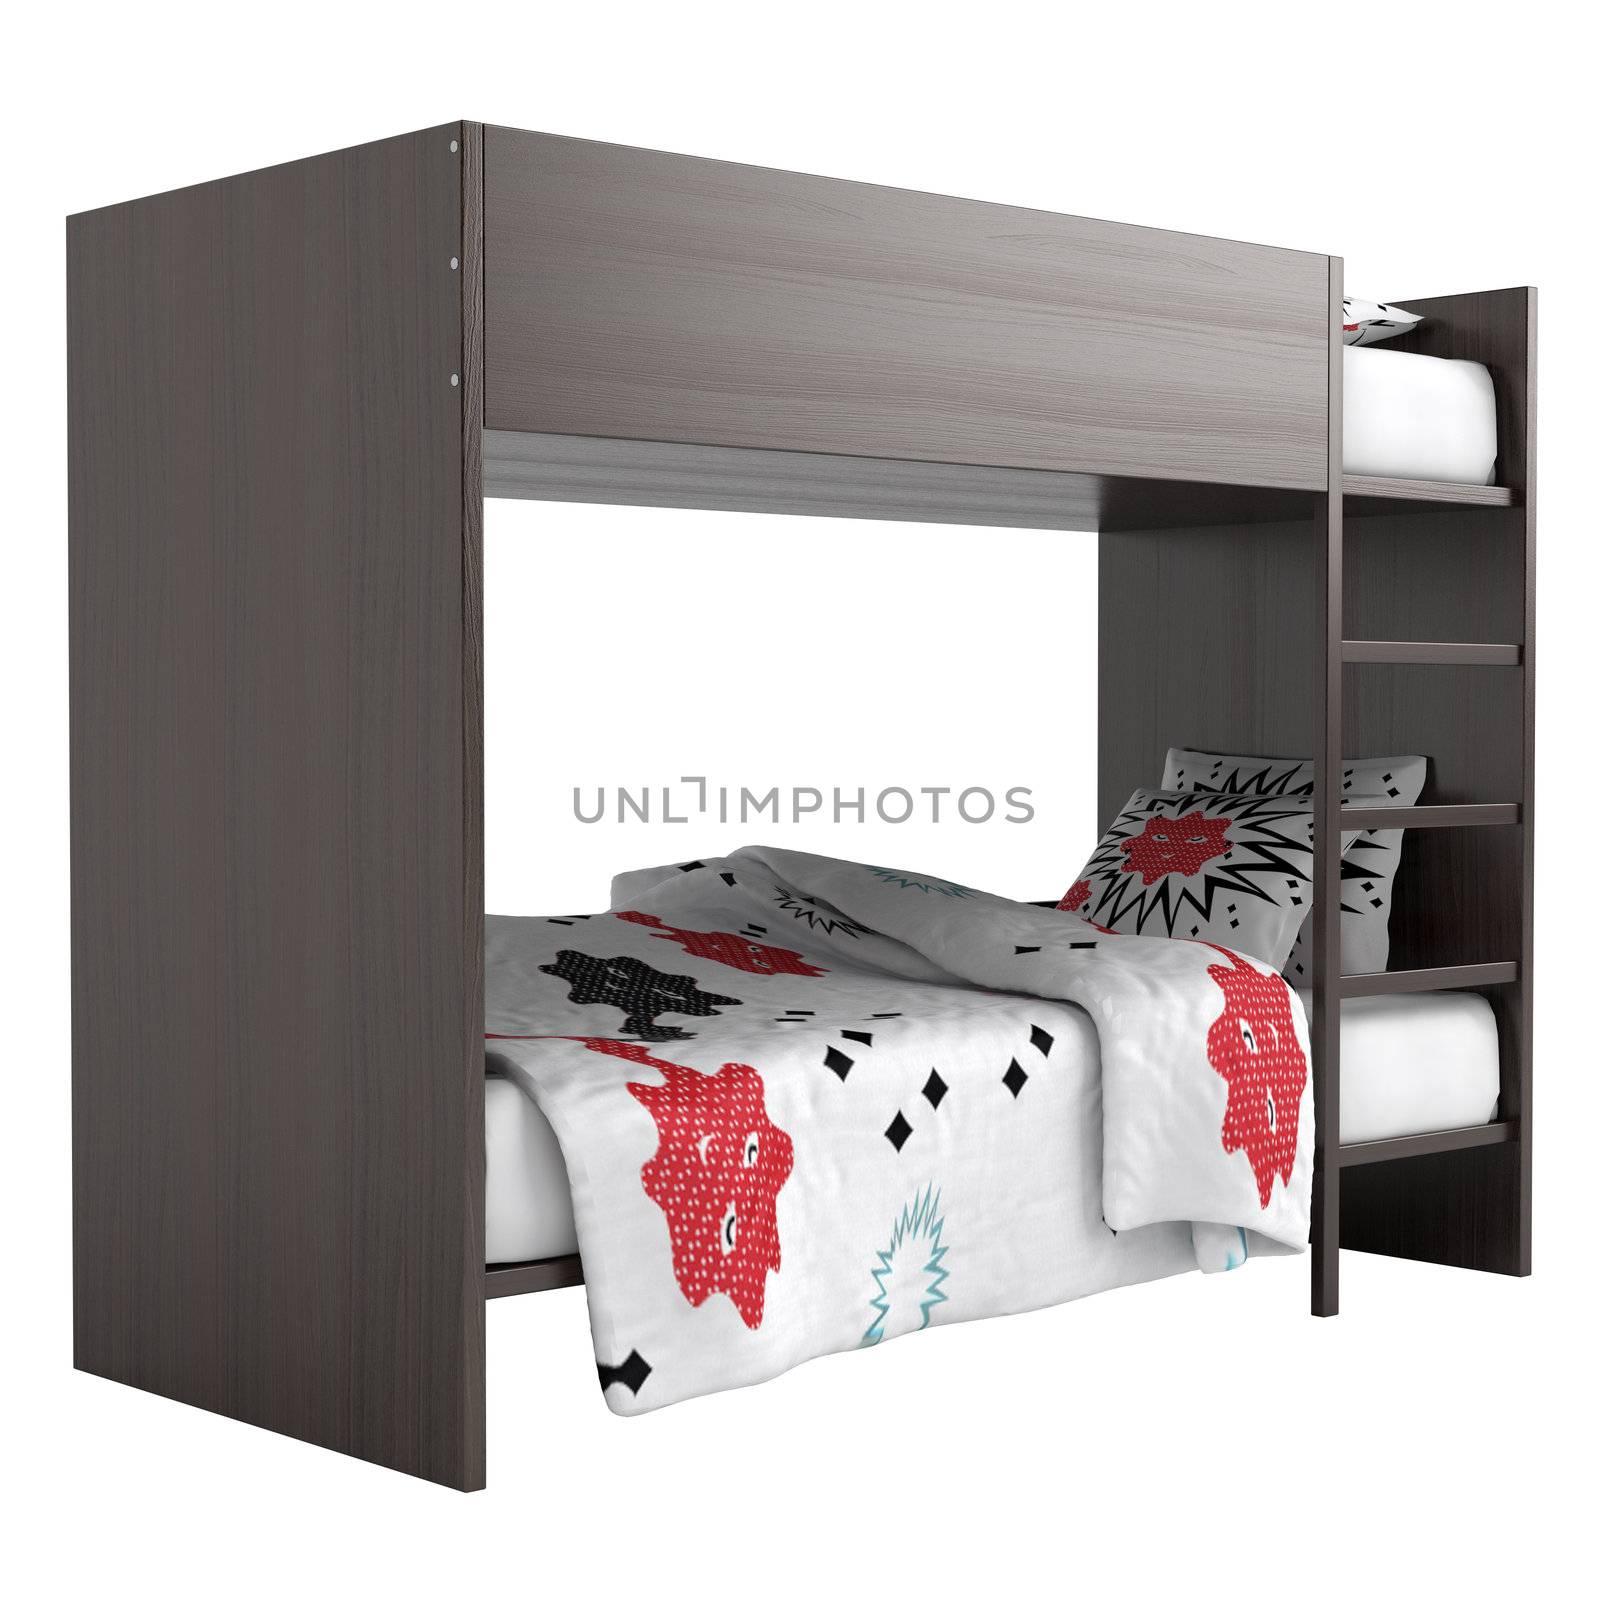 Modern bunk bed with bedding by AlexanderMorozov